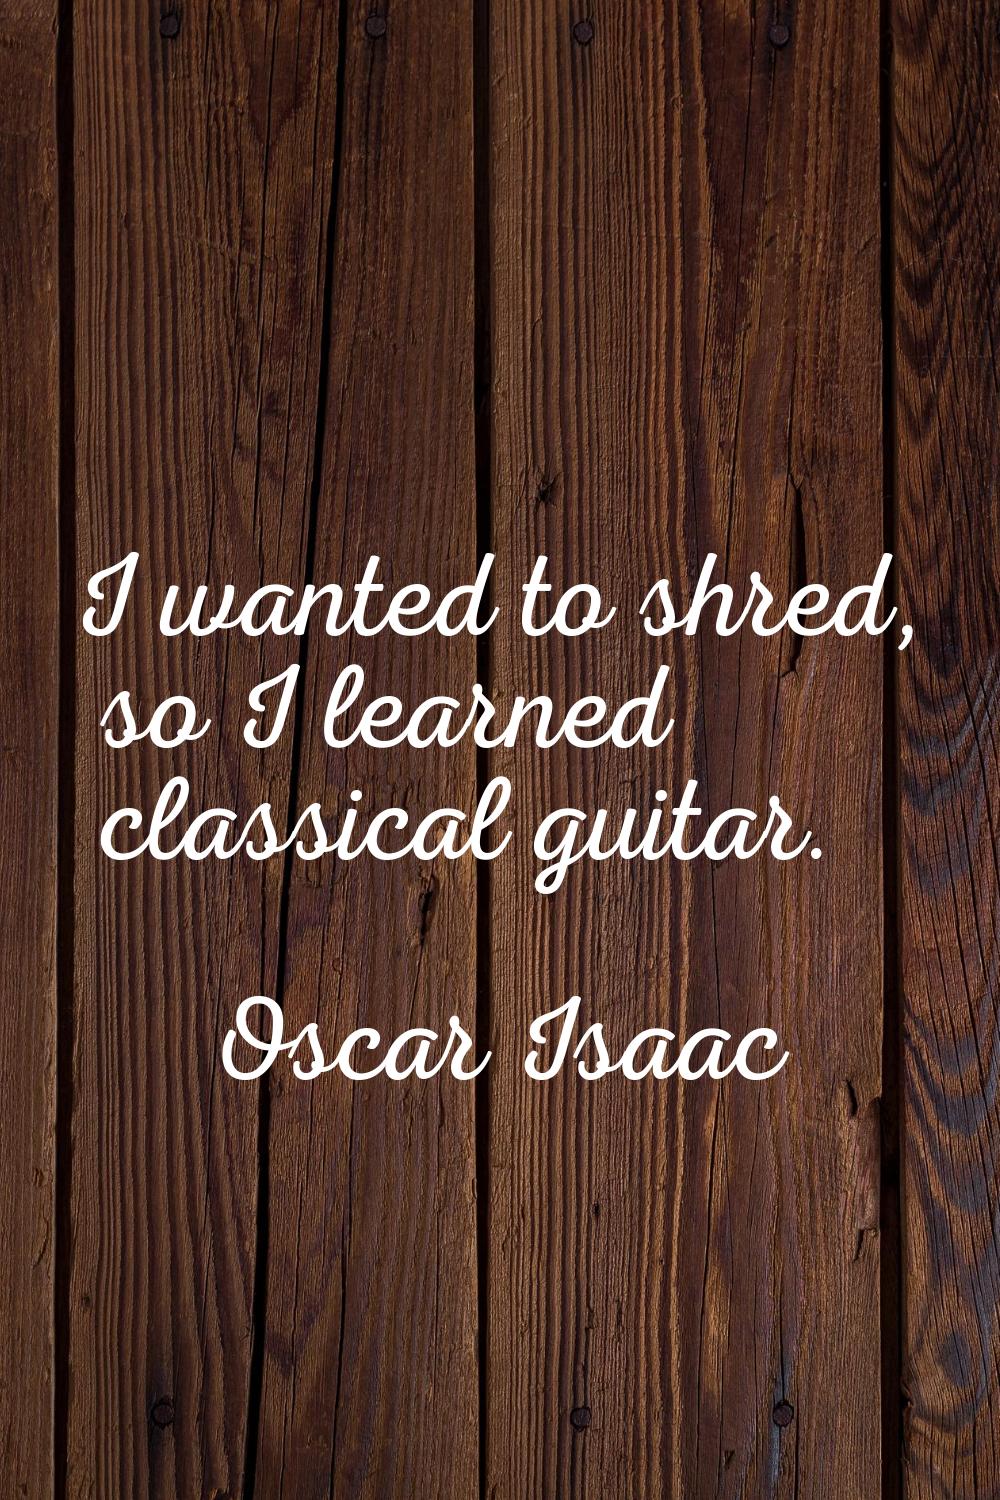 I wanted to shred, so I learned classical guitar.